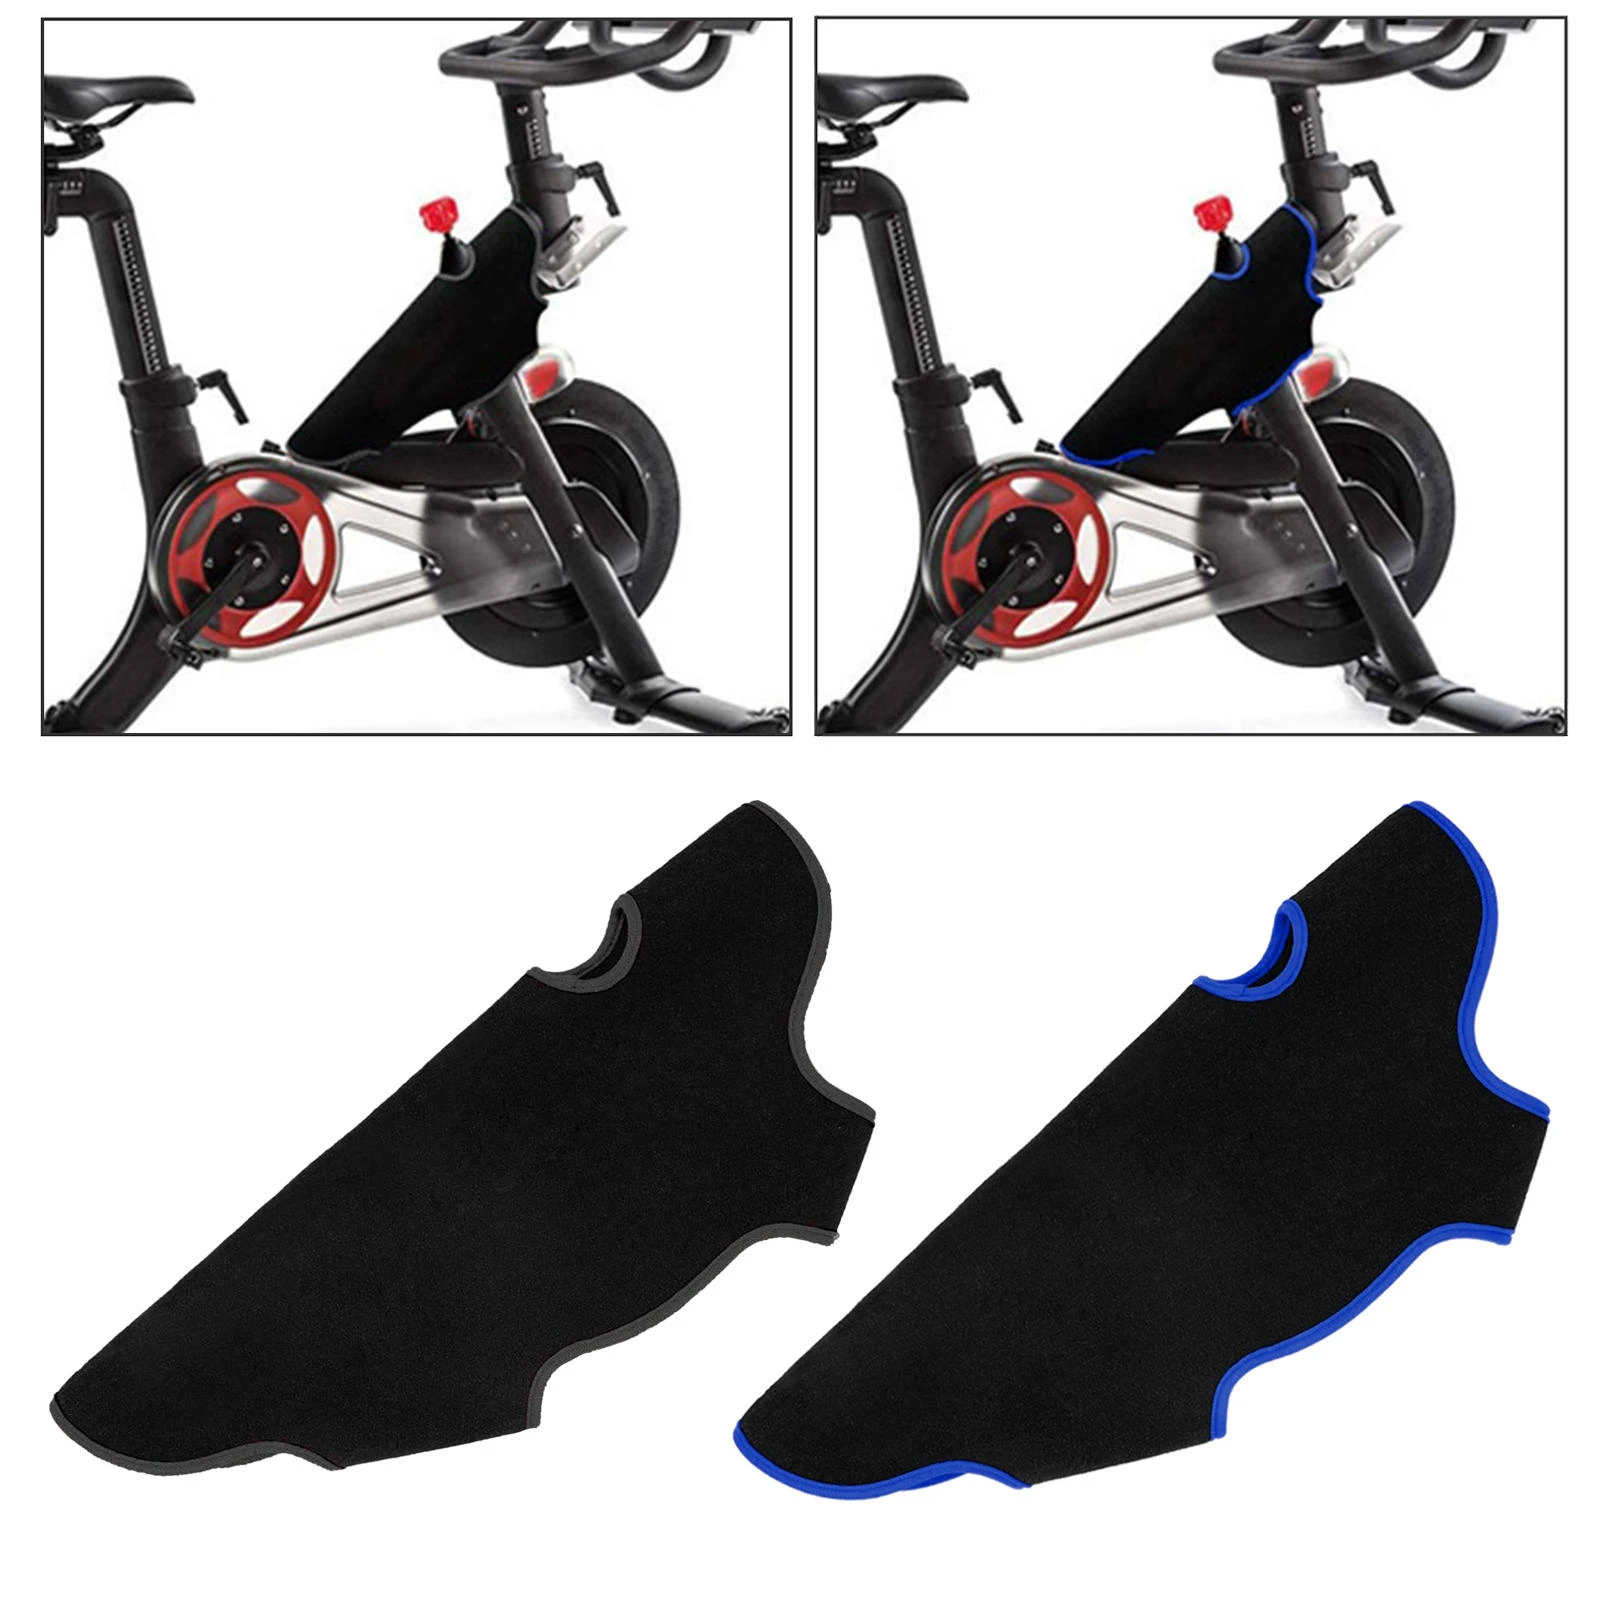 Bike Covers Sweat-Proof Cover for Peloton Spin Bike,Sports Bike Frame Protection Cover Indoor Sports Waterproof and Dustproof Exercise Bike Bicycle Frame Sweat-Proof Wrapping Kit